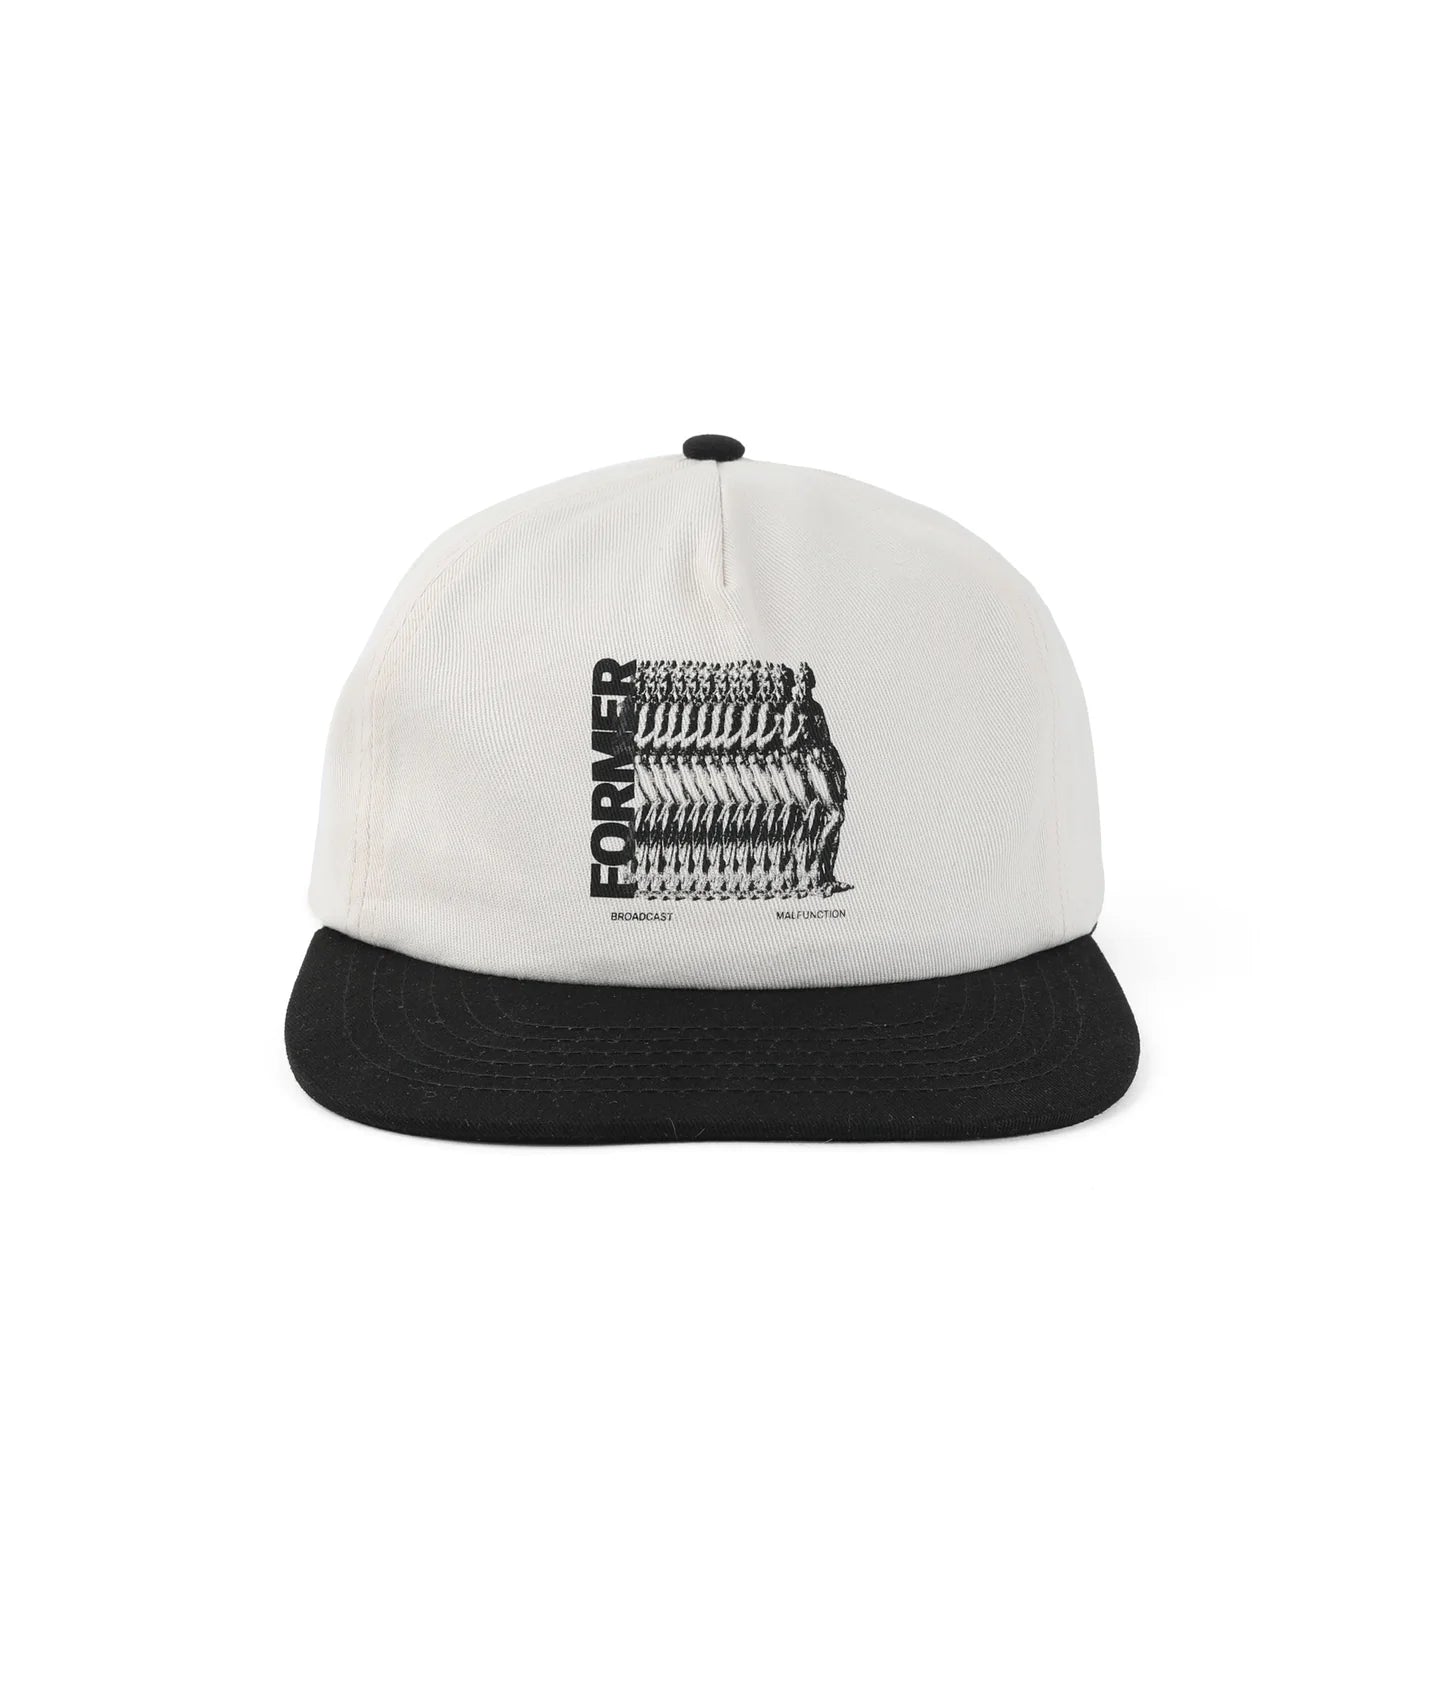 ICON CAP // NATURAL – FORMER MERCHANDISE | JAPAN OFFICIAL SITE